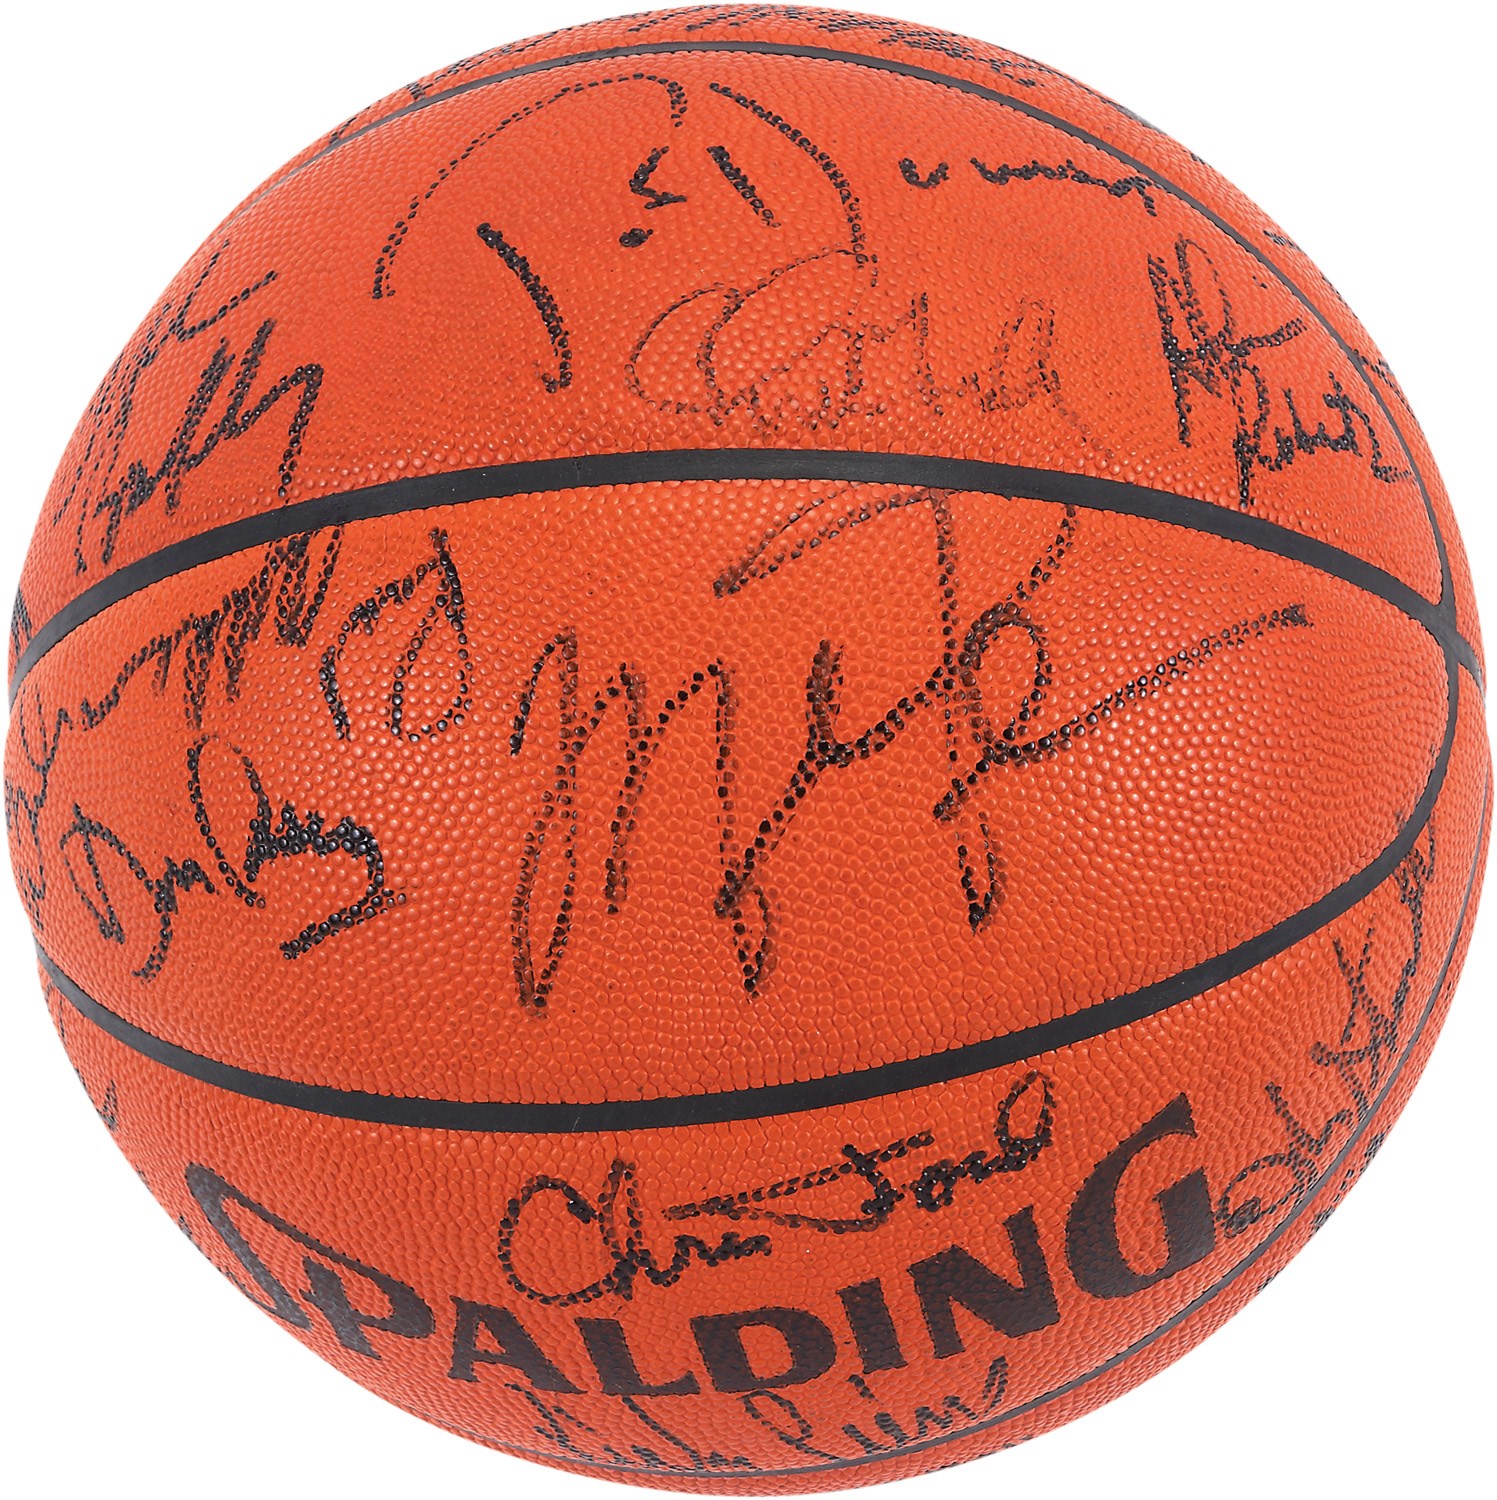 - 1991 NBA Eastern & Western Conference All-Star Complete Team-Signed Basketball